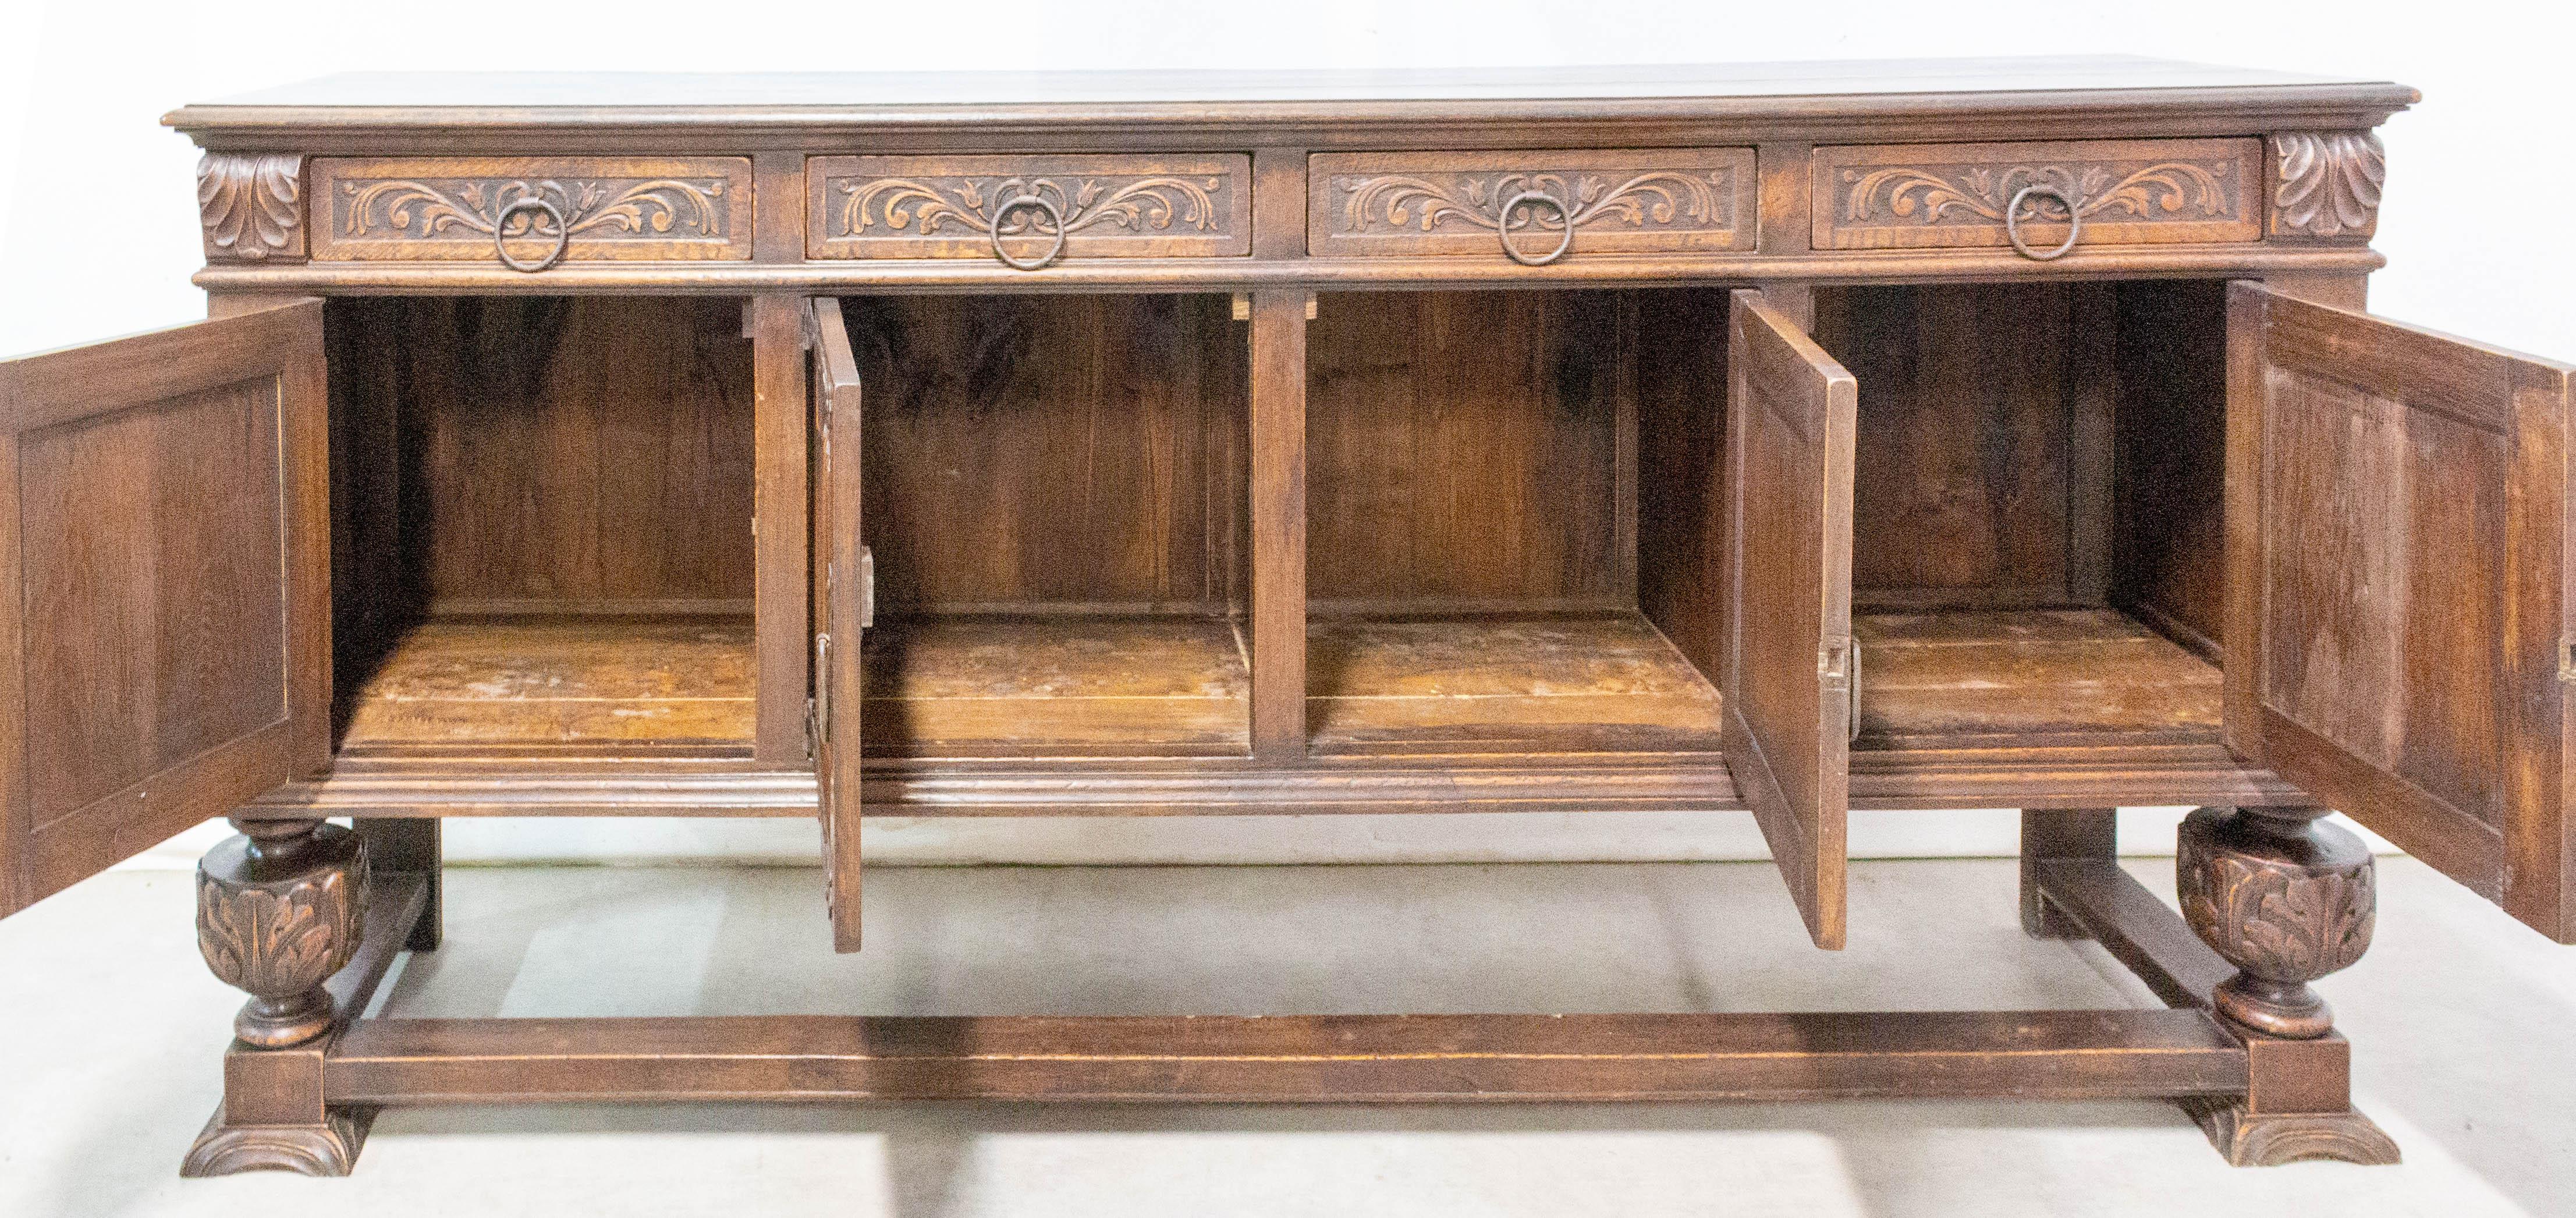 French Credenza Sideboard Spanish Oak Four Doors Buffet Gothic Revival, circa 1920